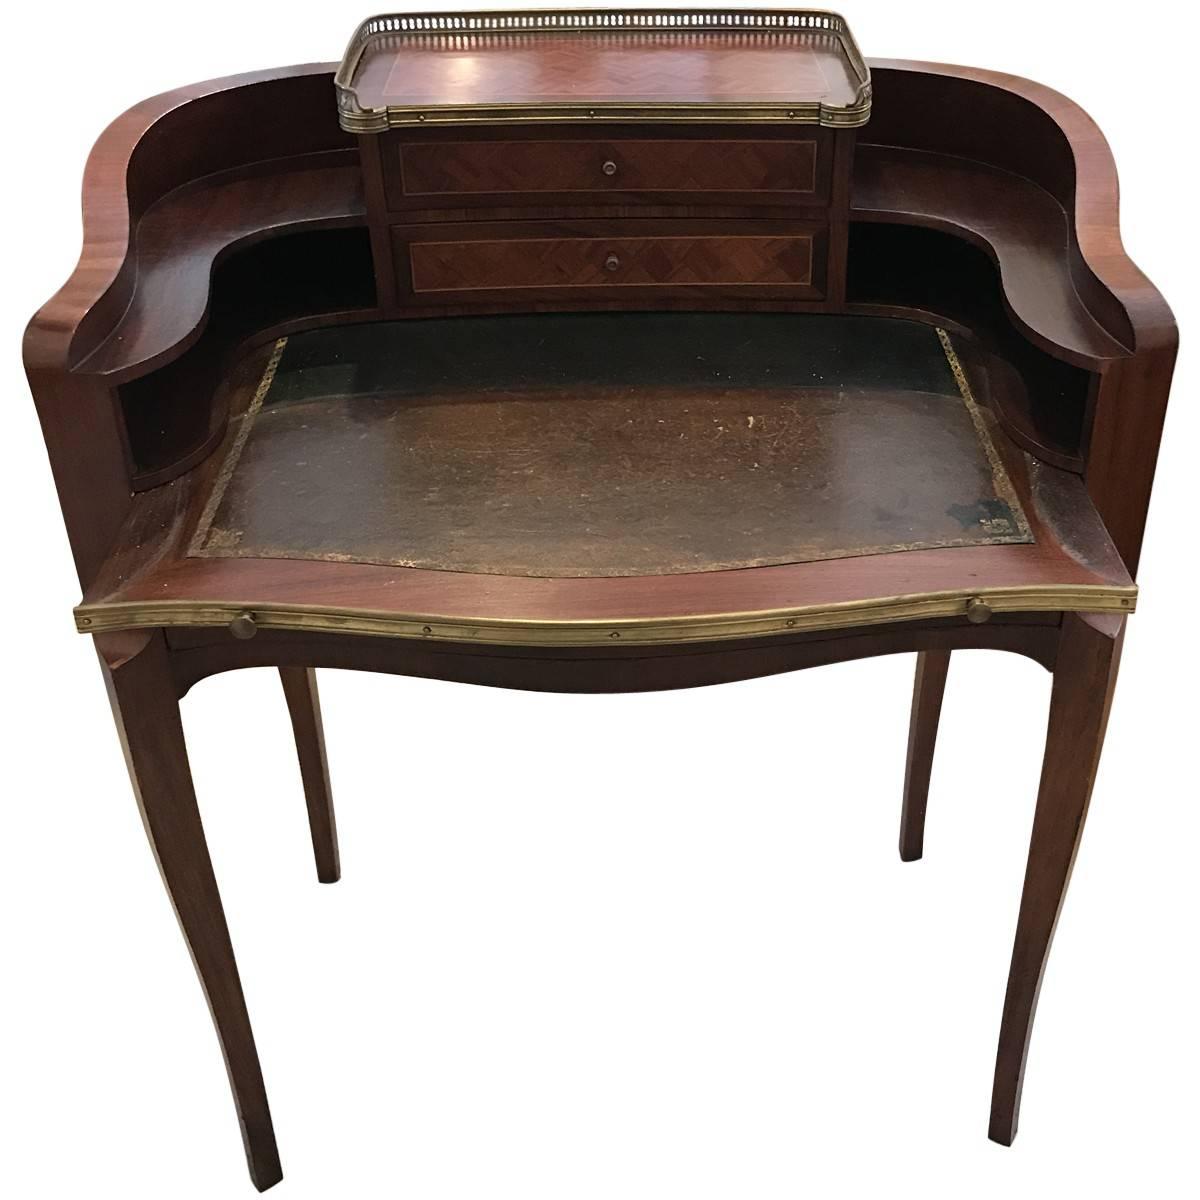 A collectible piece from bygone days, featuring the finest craftsmanship, materials, and design elements of its given era. Rich and elegant, this dapper writing desk is crafted from flamed mahogany and features a leather top inlay. Three drawers